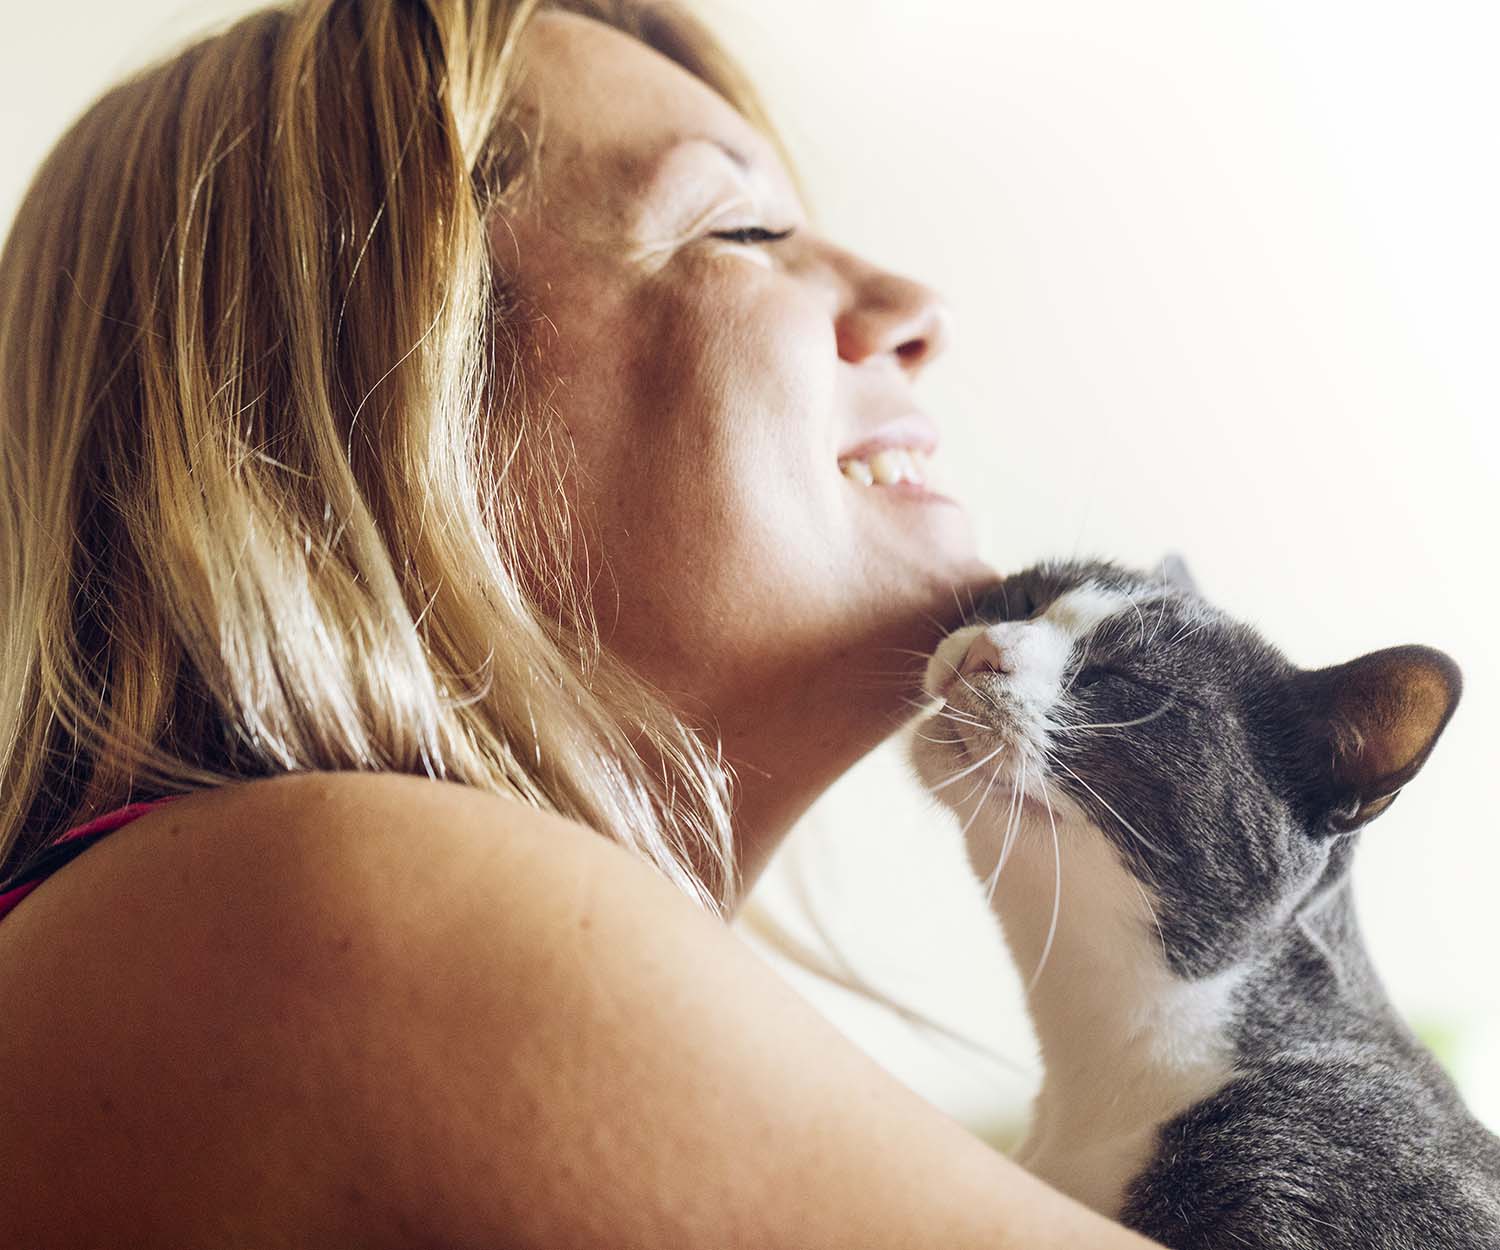 Study finds cats have had a bad rap – they actually care about us quite a lot